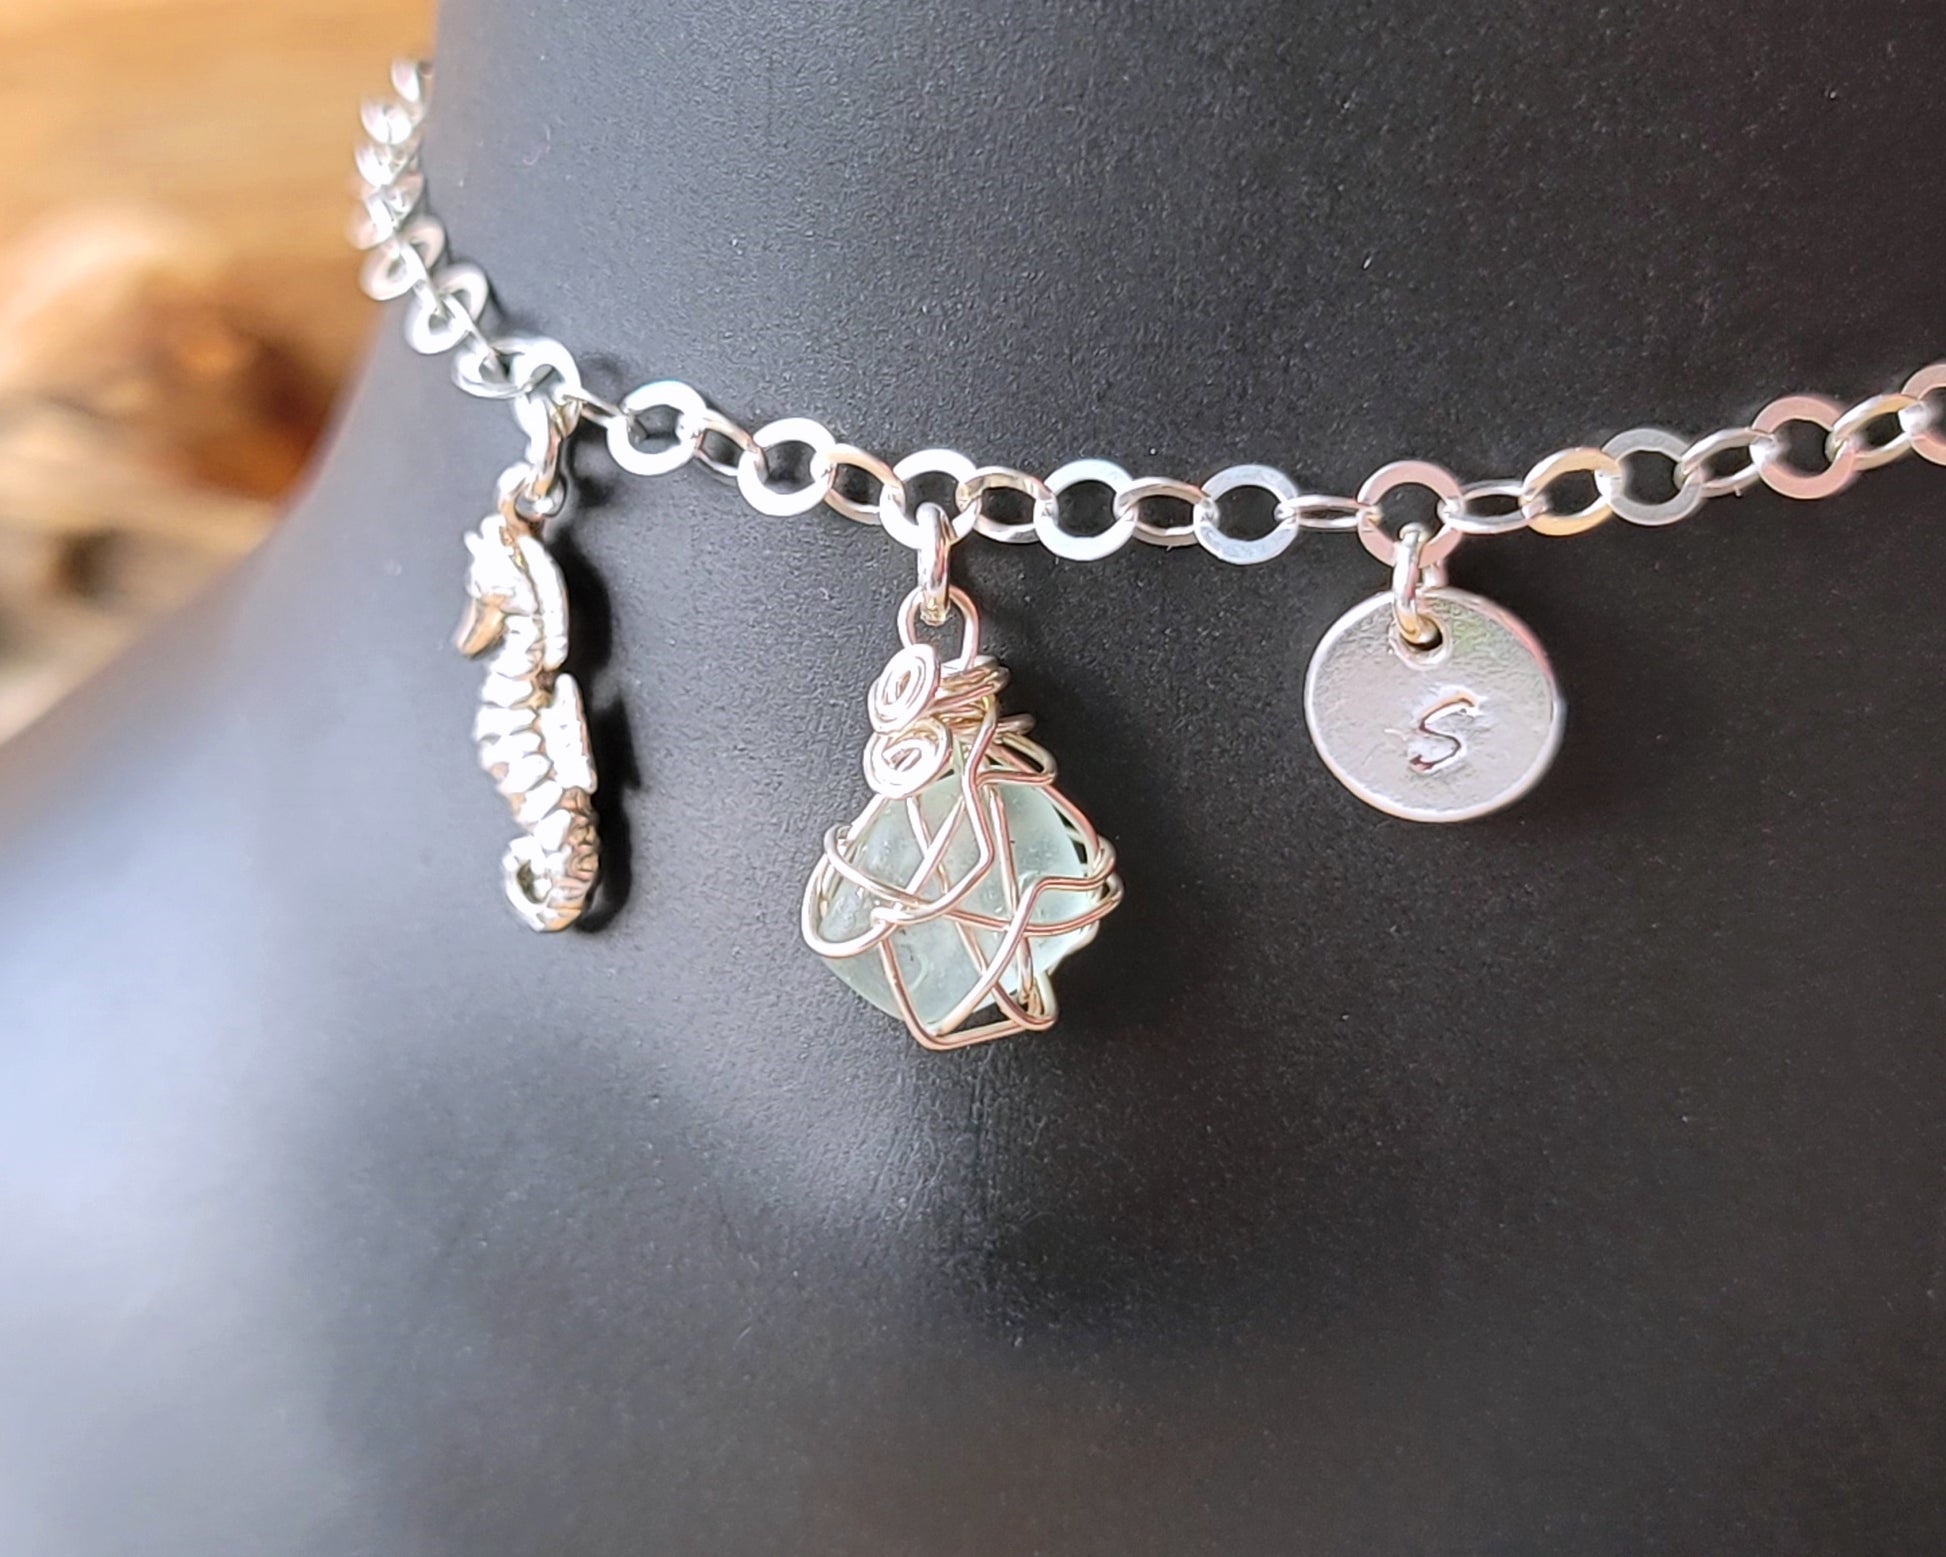 Deluxe Personalized Beach Glass, Sea Horse, Initial Ankle Bracelet, Anklet. One of a kind chain with Dangly Pendants handmade with solid 925 Sterling Silver and pale Aqua Blue Lake Ontario Beach Glass